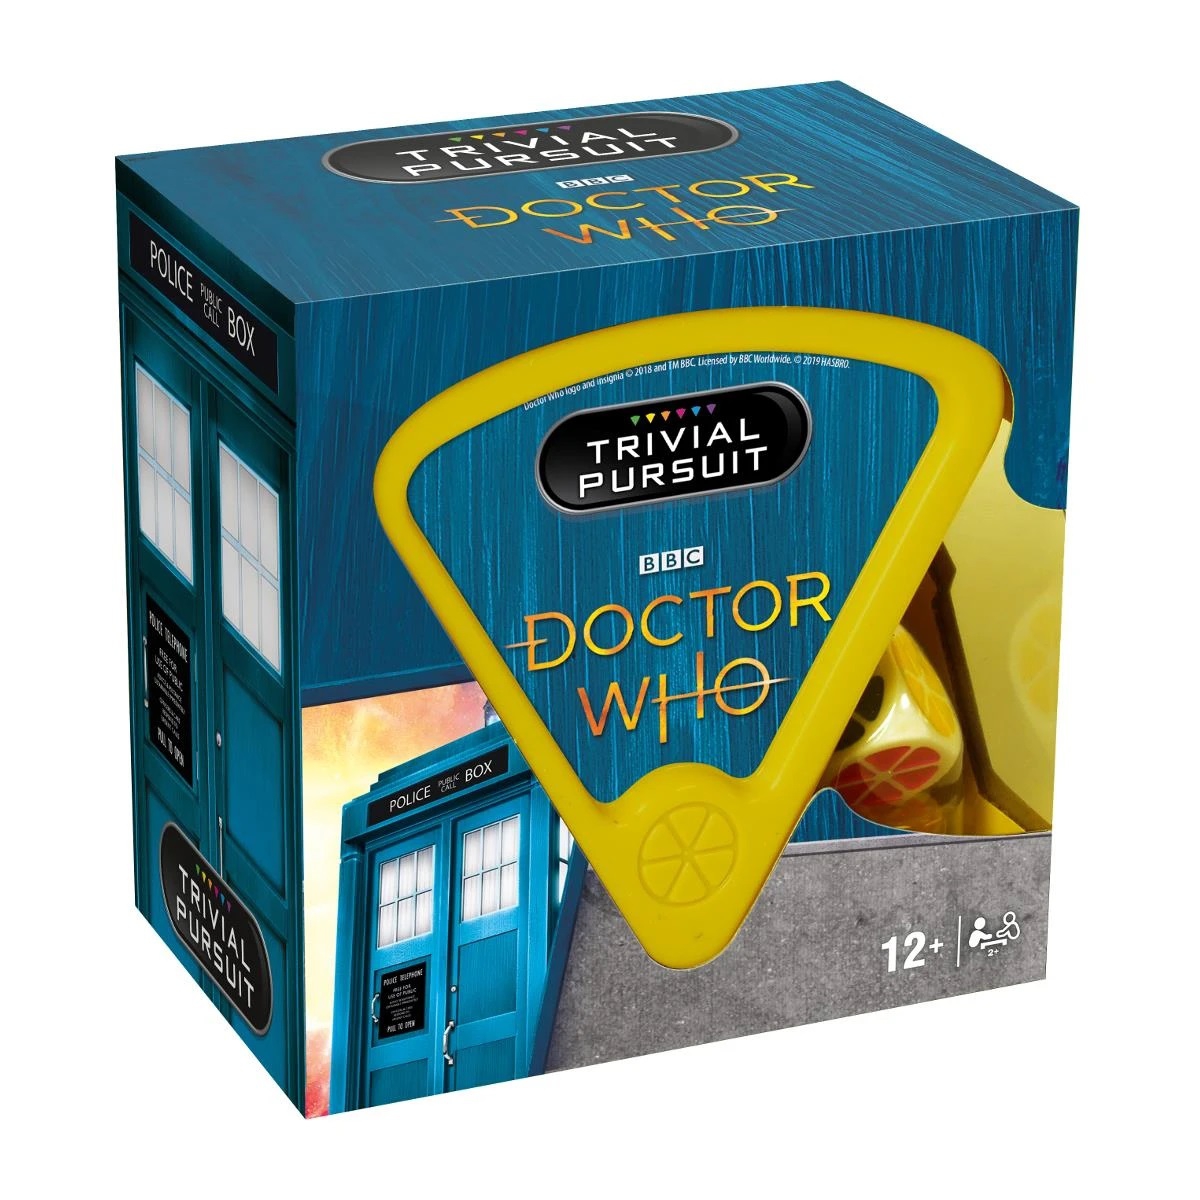 Dr. Who Trivial Pursuit Card Game